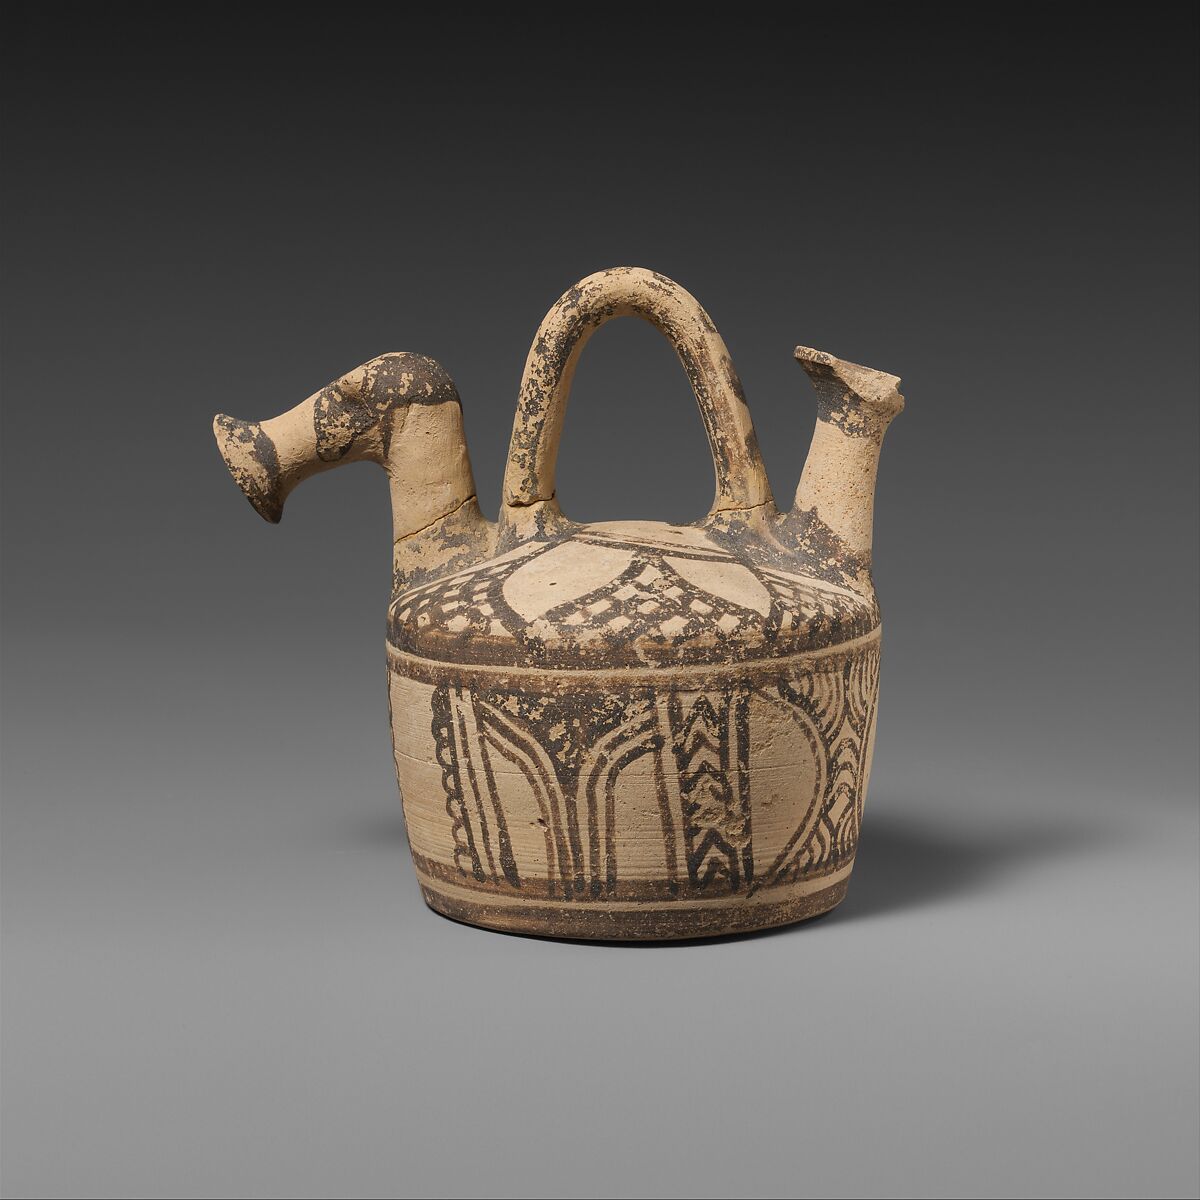 Terracotta askos (flask with spout and handle over the top), Terracotta, Cypriot 